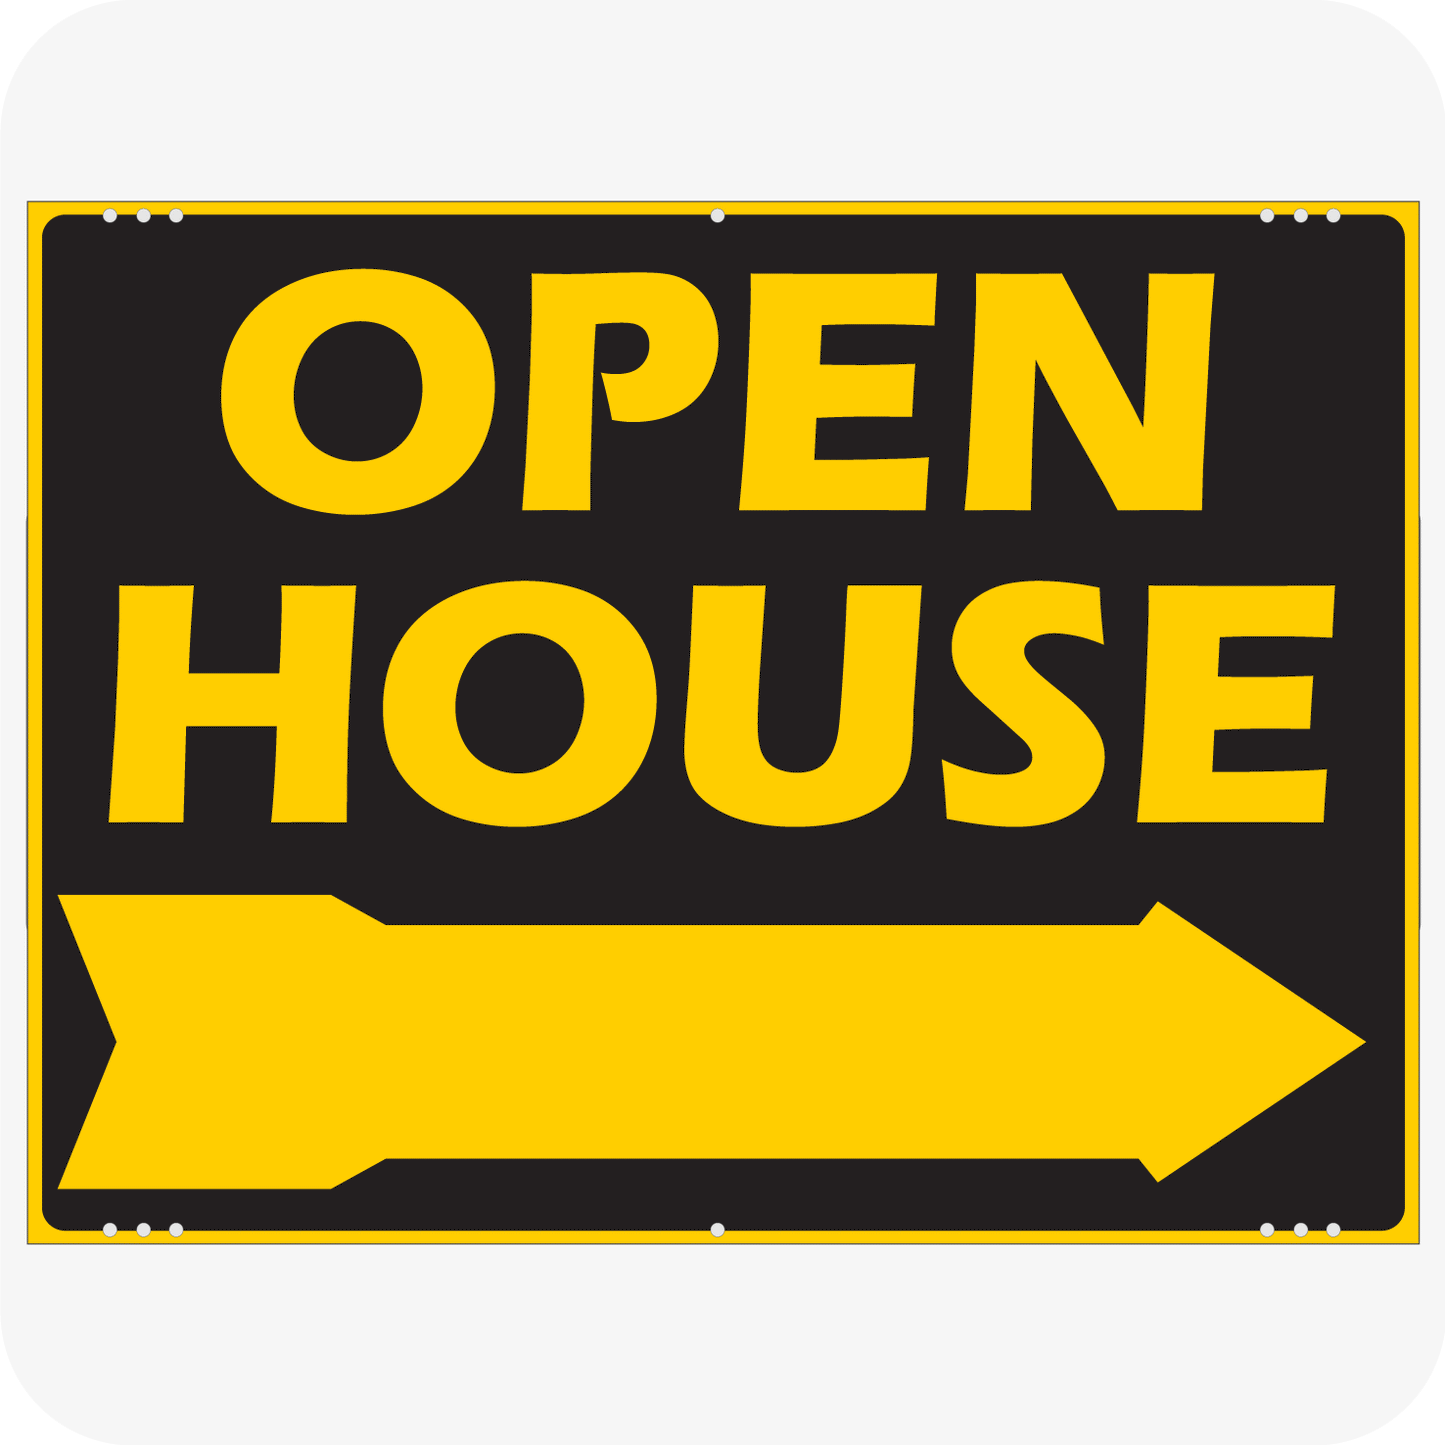 Open House Arrow 18 x 24 Corrugated Panel - Black and Yellow